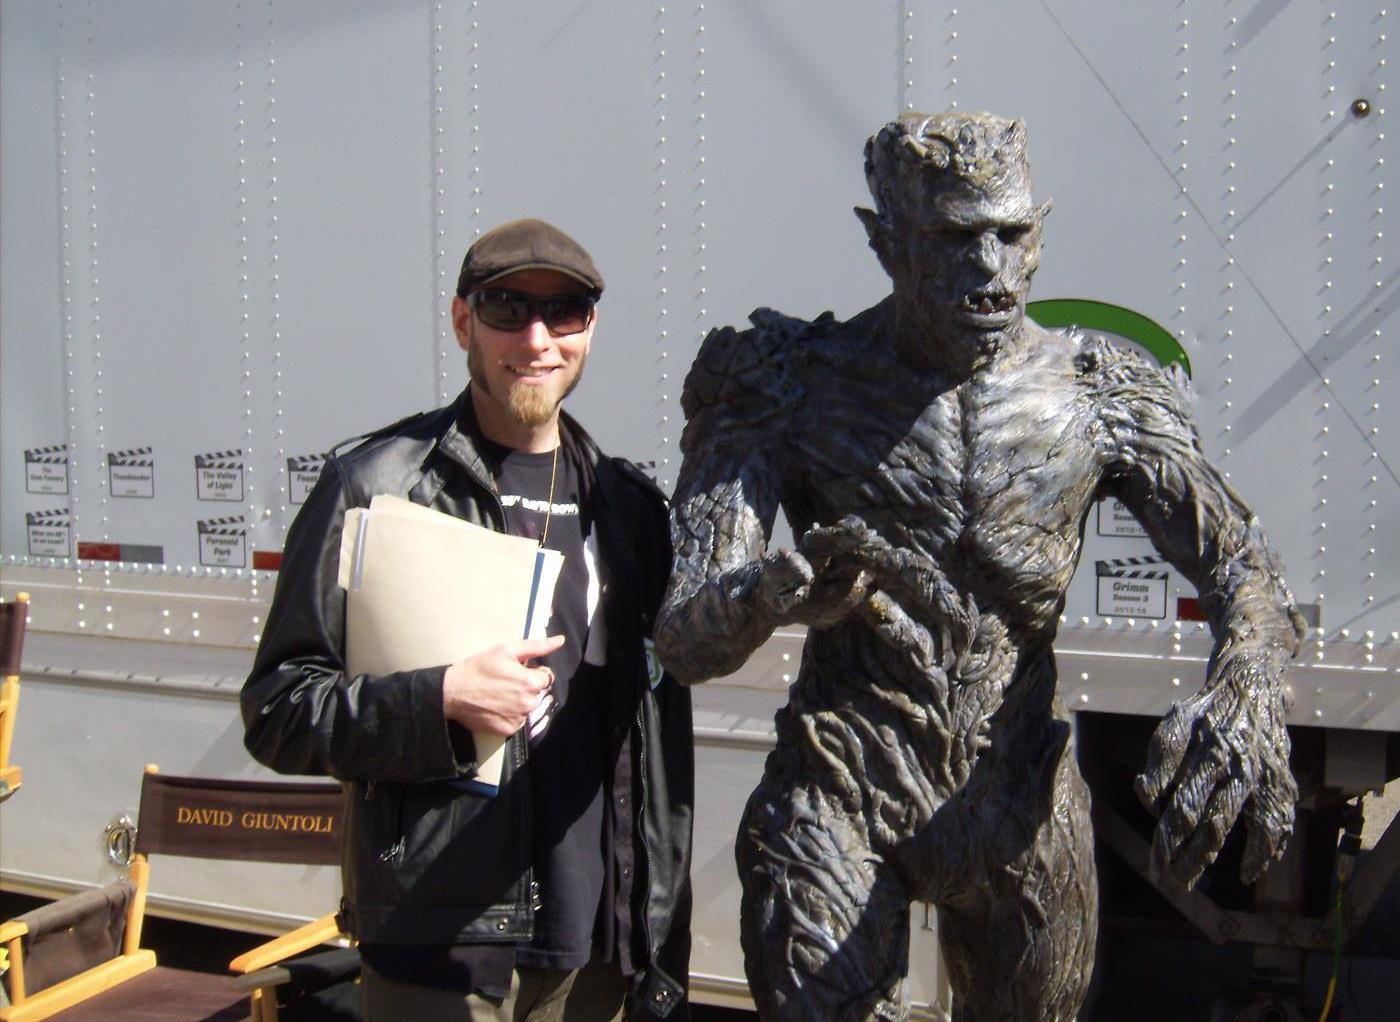 Danny with Character from T.V. Series Grimm. 2013